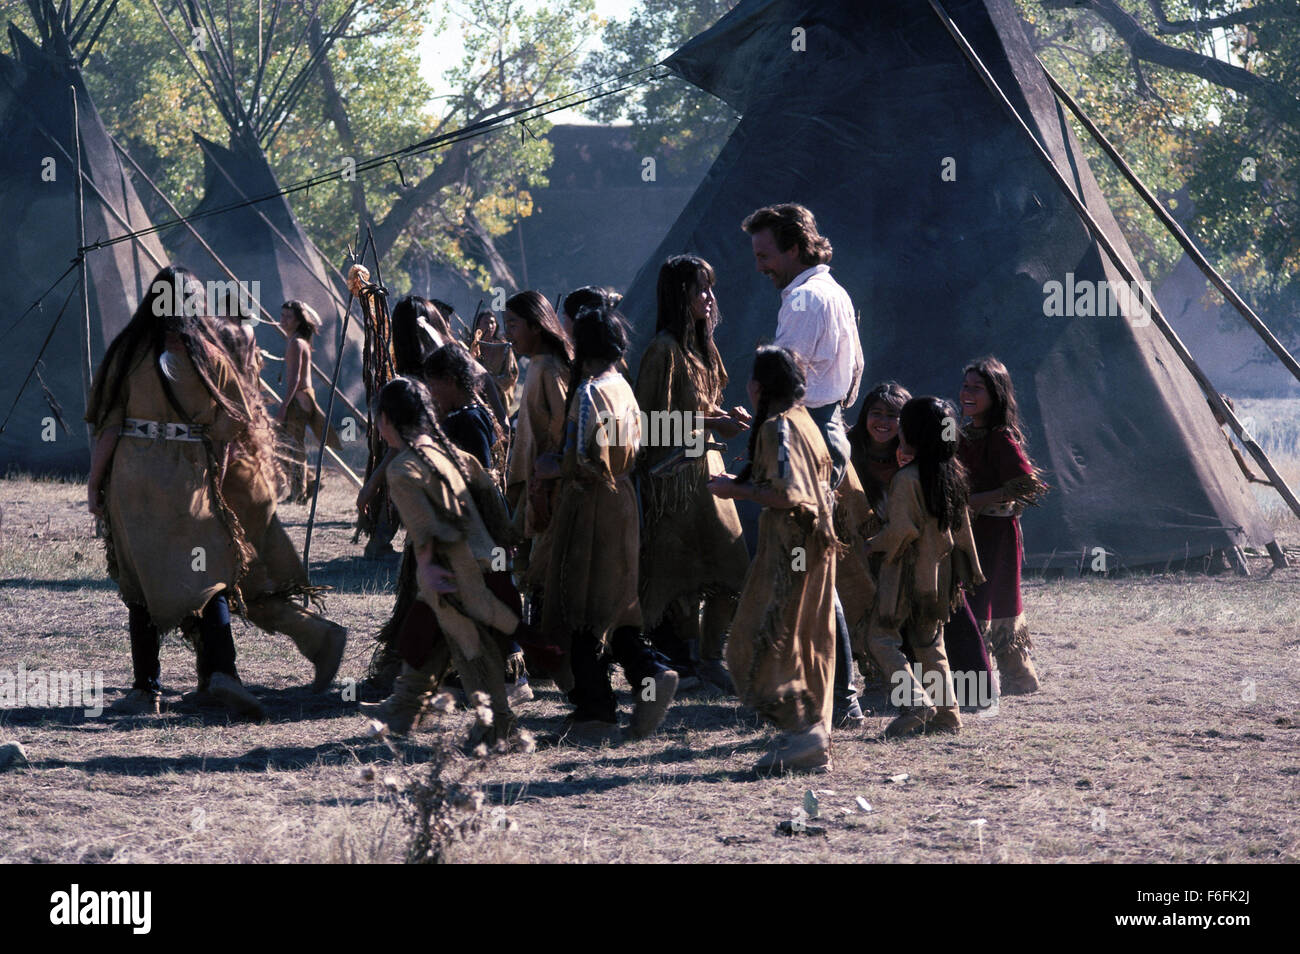 RELEASE DATE: November 21, 1990  TITLE: Dances With Wolves  STUDIO: Columbia TriStar  DIRECTOR: Kevin Costner  PLOT: Having been sent to a remote outpost in the wilderness of the Dakota territory during the American Civil War, Lieutenant John Dunbar encounters, and is eventually accepted into, the local Sioux tribe. He is known as 'Dances with Wolves' to them and as time passes he becomes enamoured by the beautiful 'Stands With a Fist'. Not soon after, the frontier becomes the frontier no more, and as the army advances on the plains, John must make a decision that will not only affect him, but Stock Photo